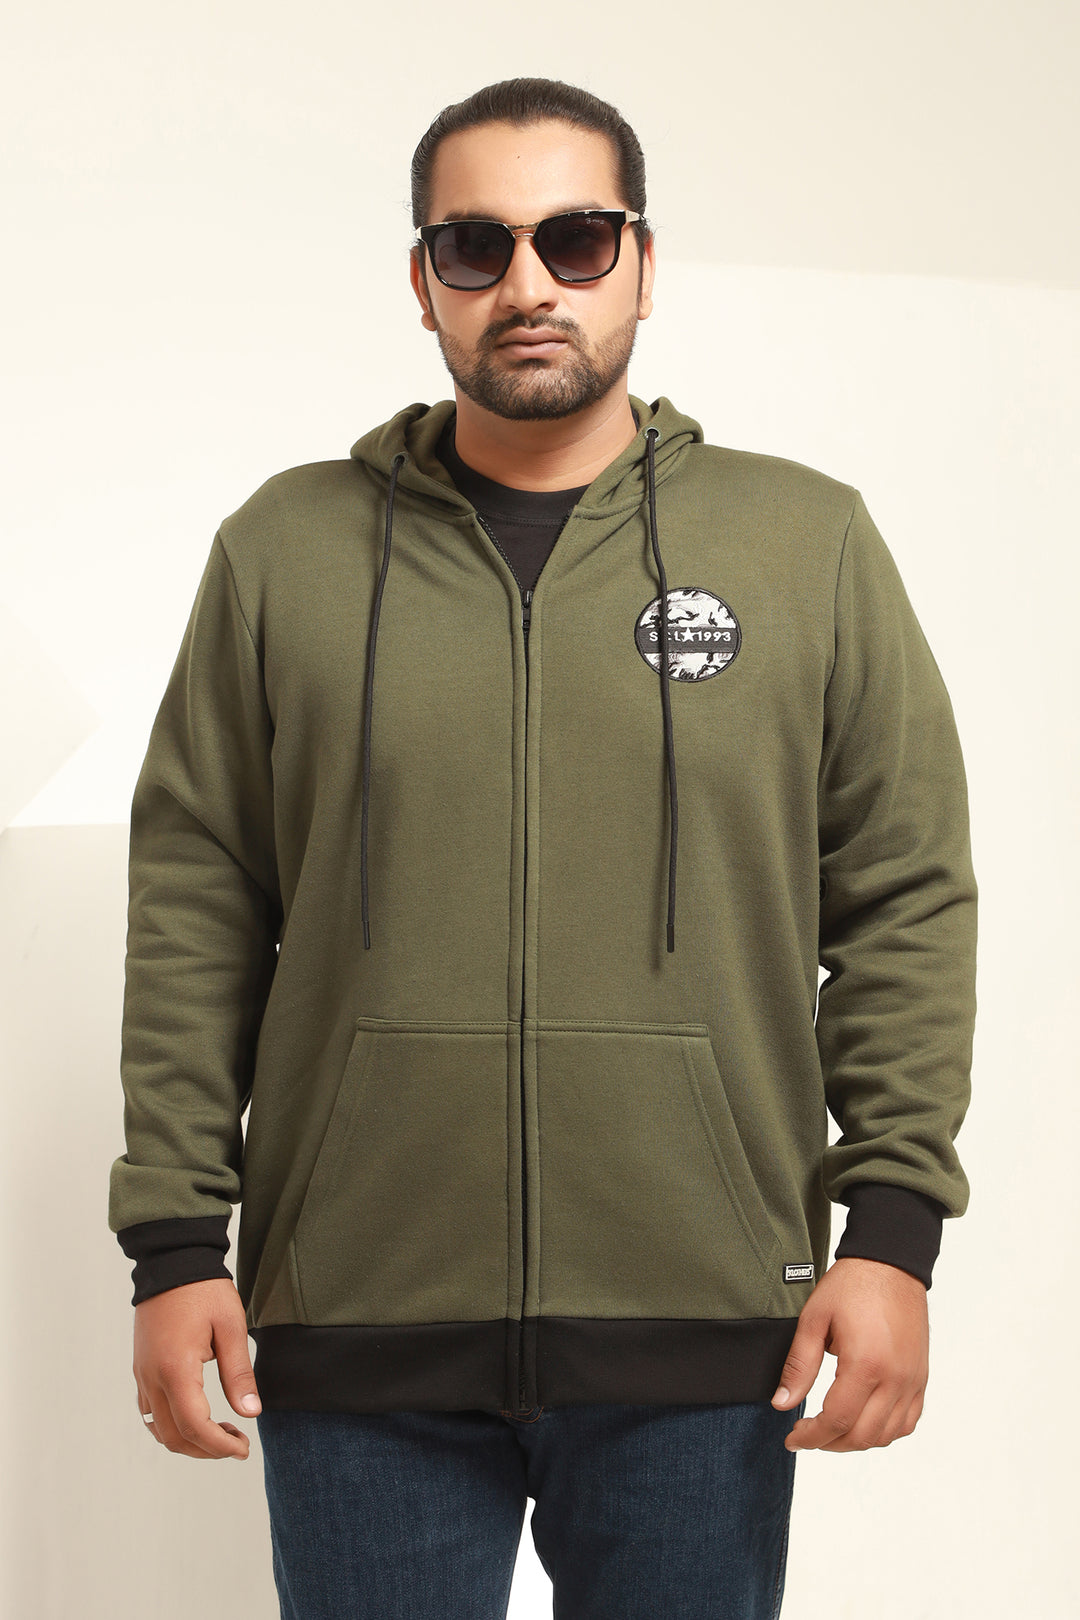 Plus Size Embroidery Hoodies in Pakistan